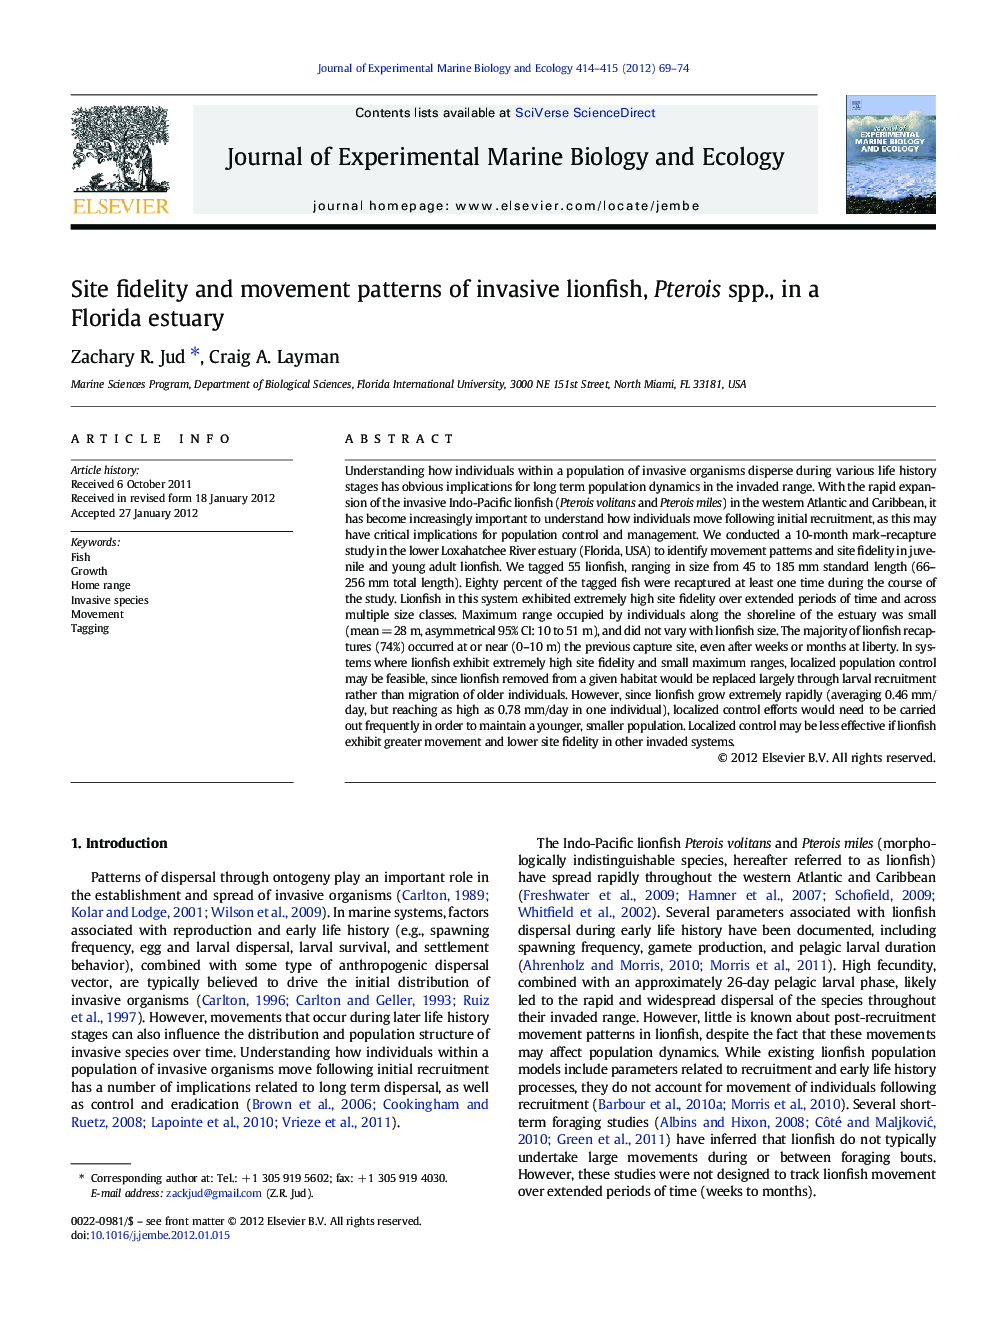 Site fidelity and movement patterns of invasive lionfish, Pterois spp., in a Florida estuary